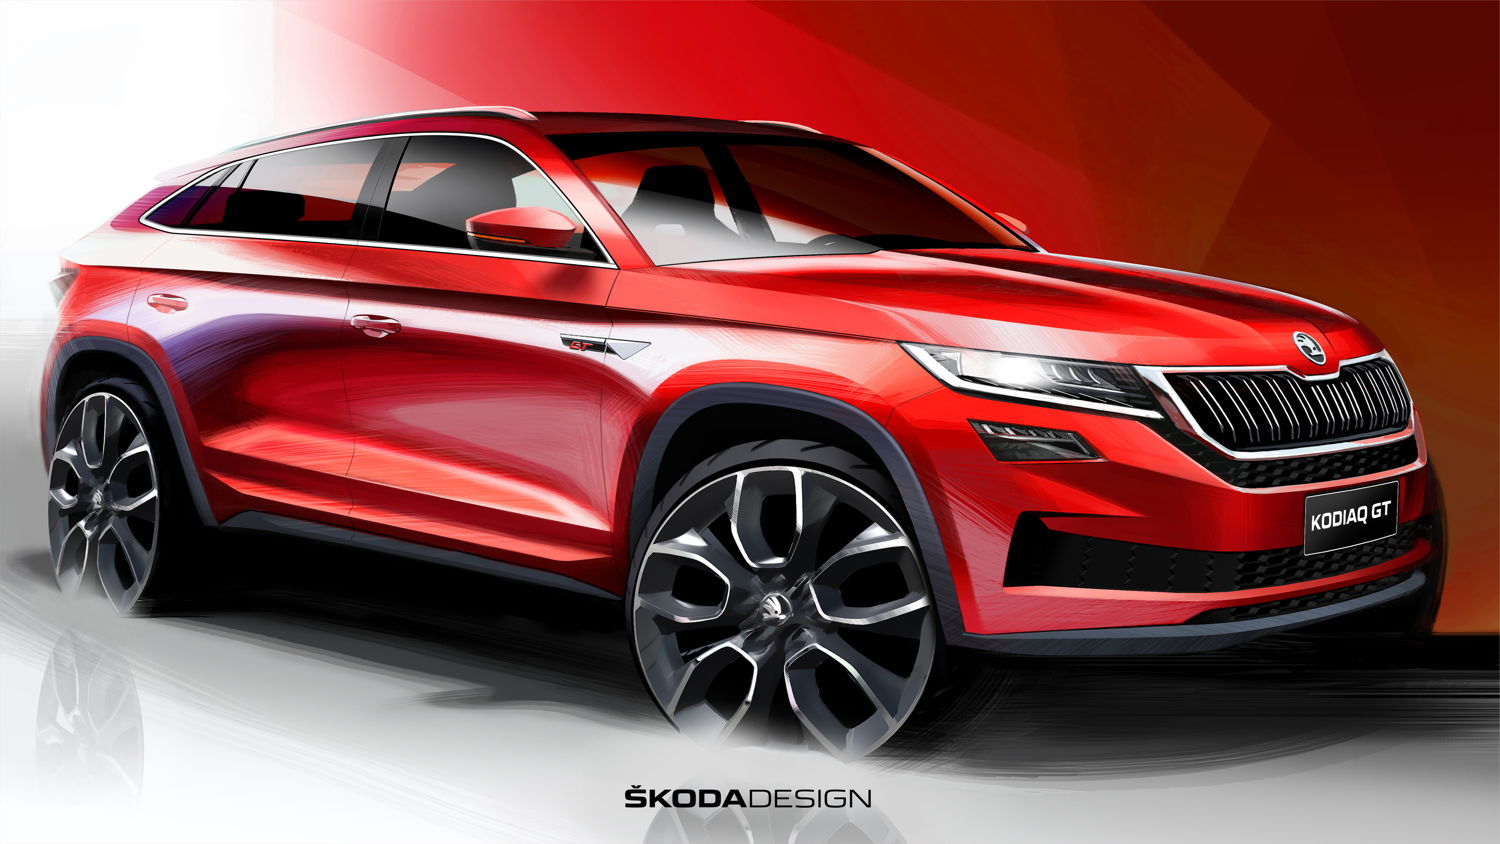 ŠKODA allows first view of future top model of the design
sketches of the new ŠKODA KODIAQ GT in the Chinese
market.